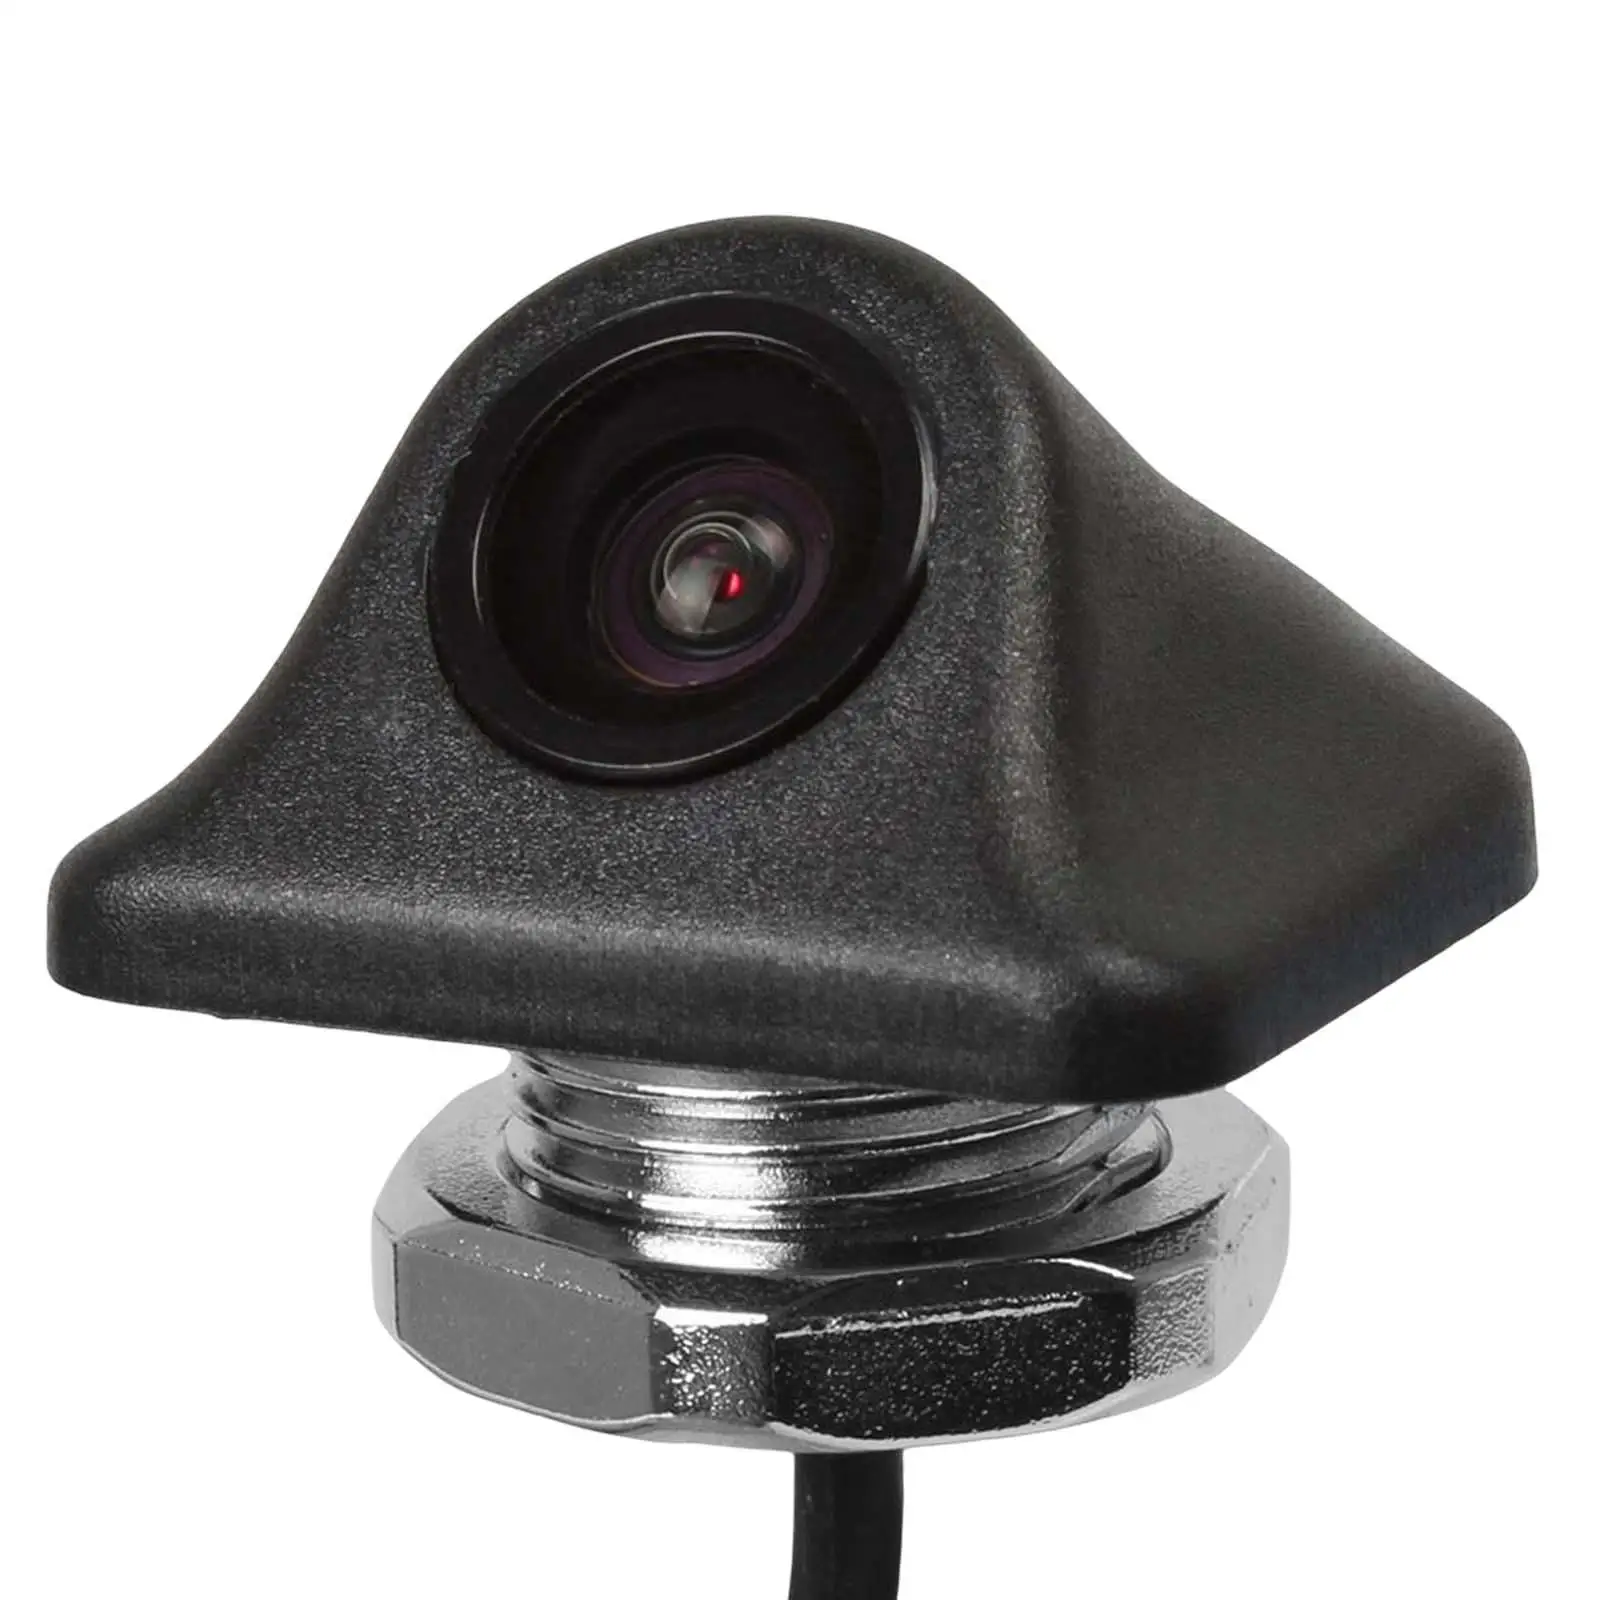 

Car Rear View Camera 170° Wide View Backup Camera for Bus RV